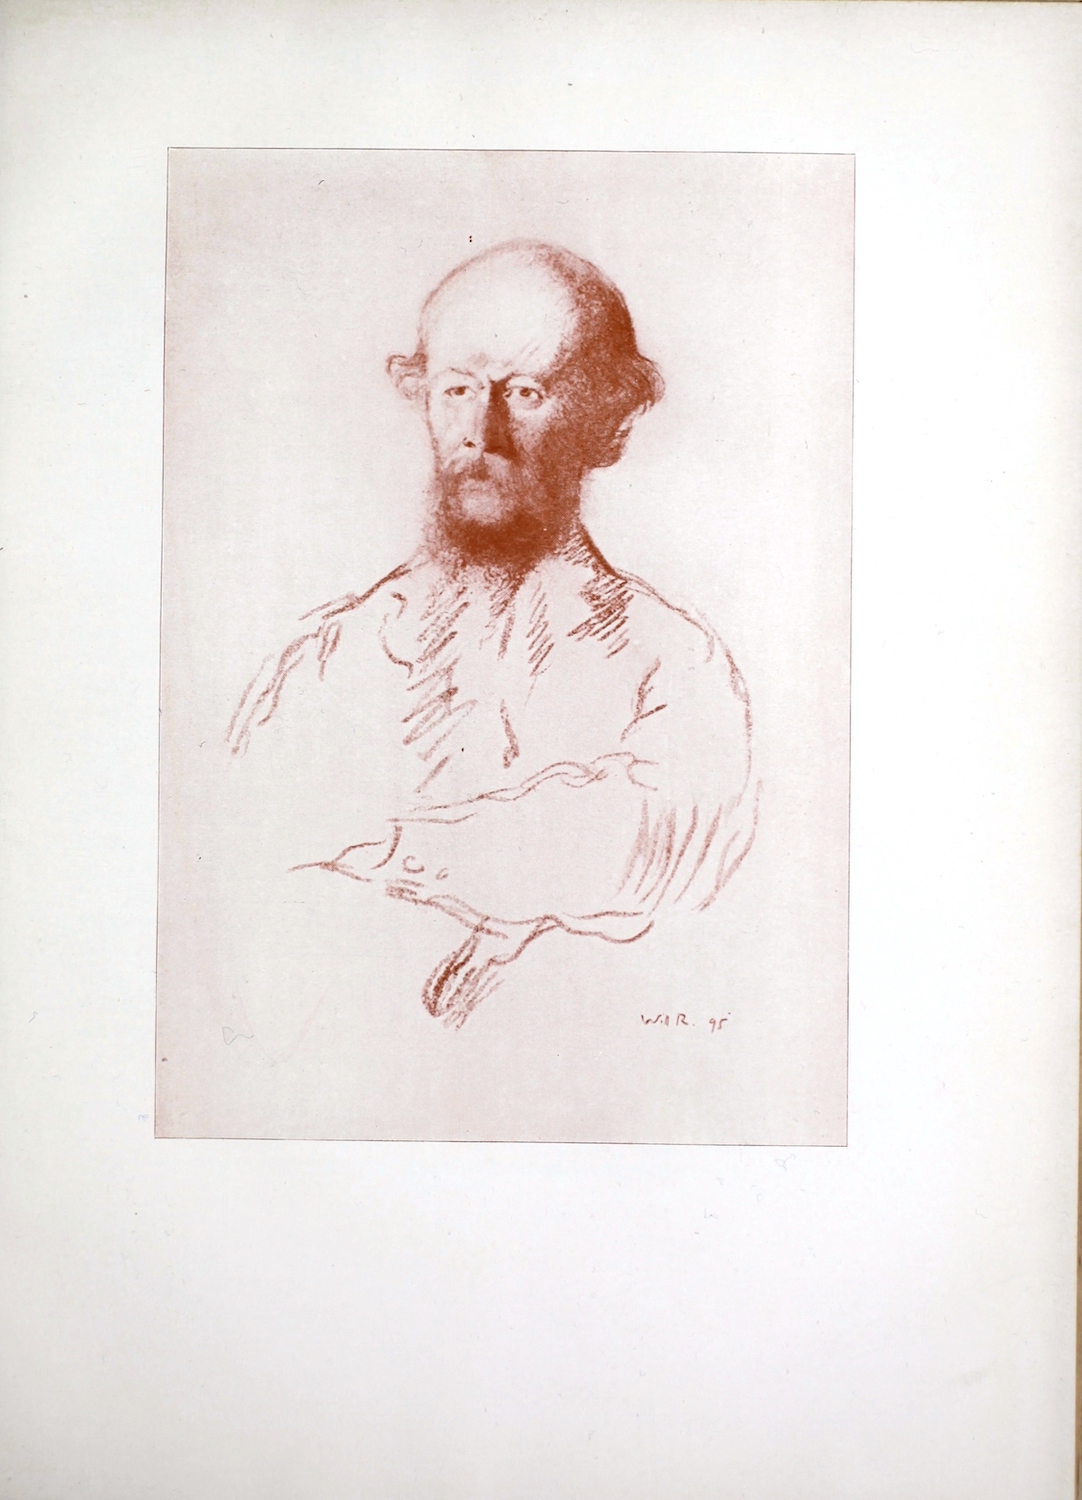 he image is reproduced in reddish brown ink to match the sanguine chalk with which the image was drawn. The unframed image is a portrait sketch of the head and torso of Algernon Charles Swinburne (1837-1909) in three-quarter profile facing left with his arms folded against his chest. His face is detailed, with heavy shading falling on the left side of his face at the temple and cheek. His head is bald on top with tufts of hair around his ears. He also wears a beard and moustache that are slightly unkept. His upper body is rudimentarily sketched, but it is possible to see that he is wearing a suit coat with shirt and collar. Two buttons are also along the left cuff of his suit jacket. No background or setting is provided by the artist.